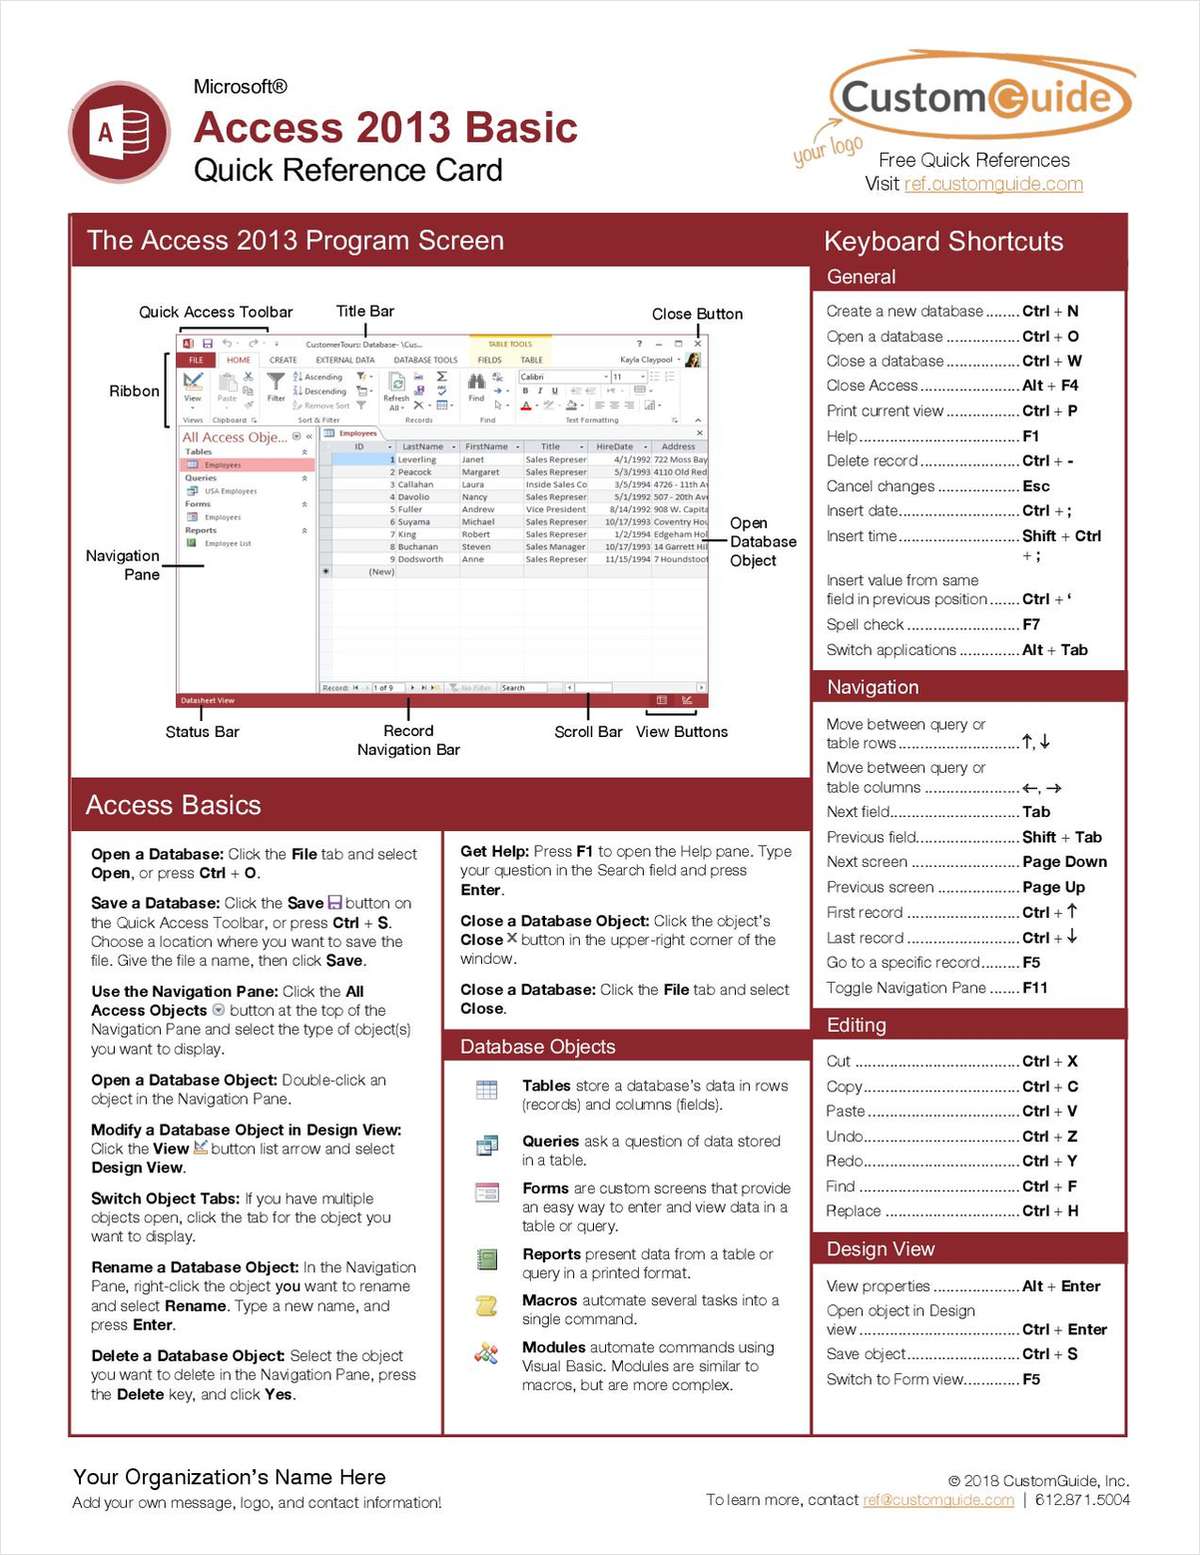 Microsoft Access 2013 Basic - Free Quick Reference Card